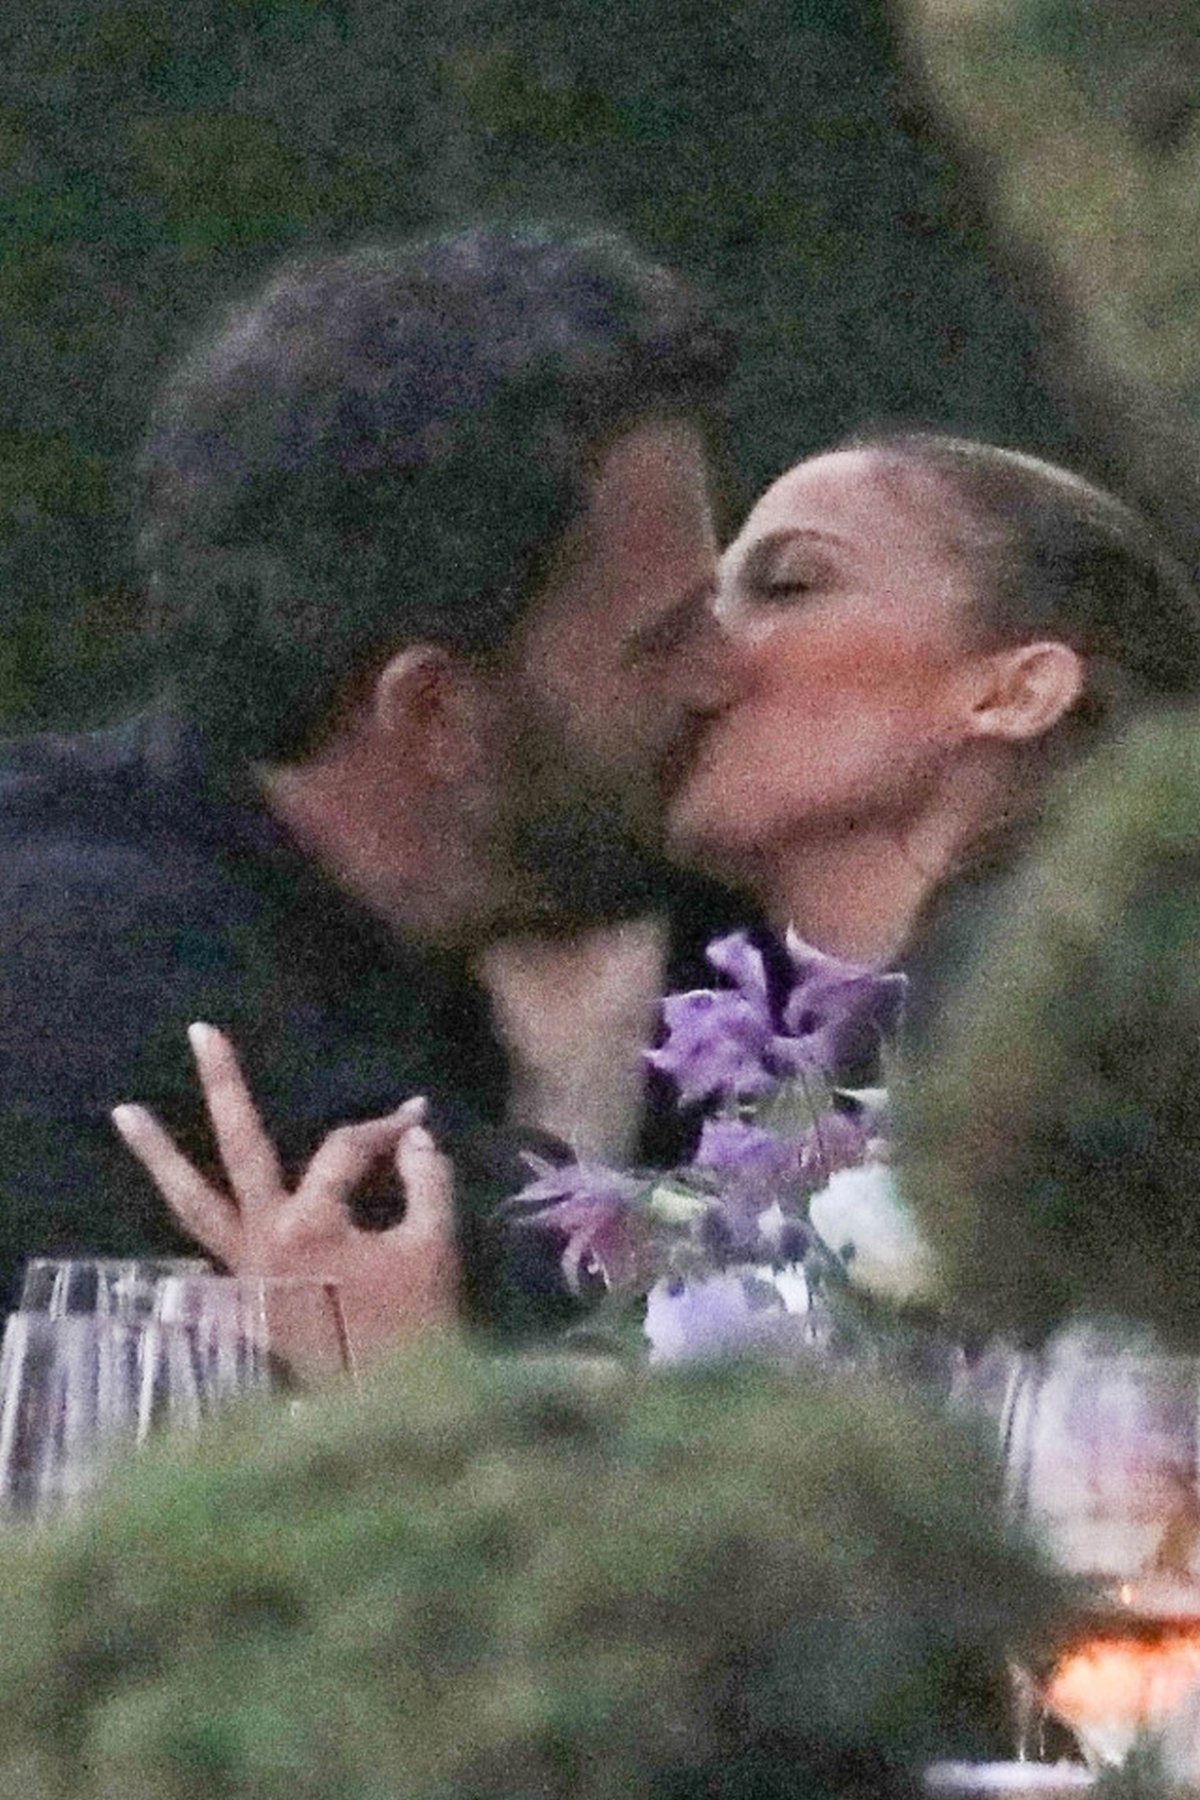 Jennifer Lopez and Ben Affleck were photographed kissing for the first time since their relationship resumed